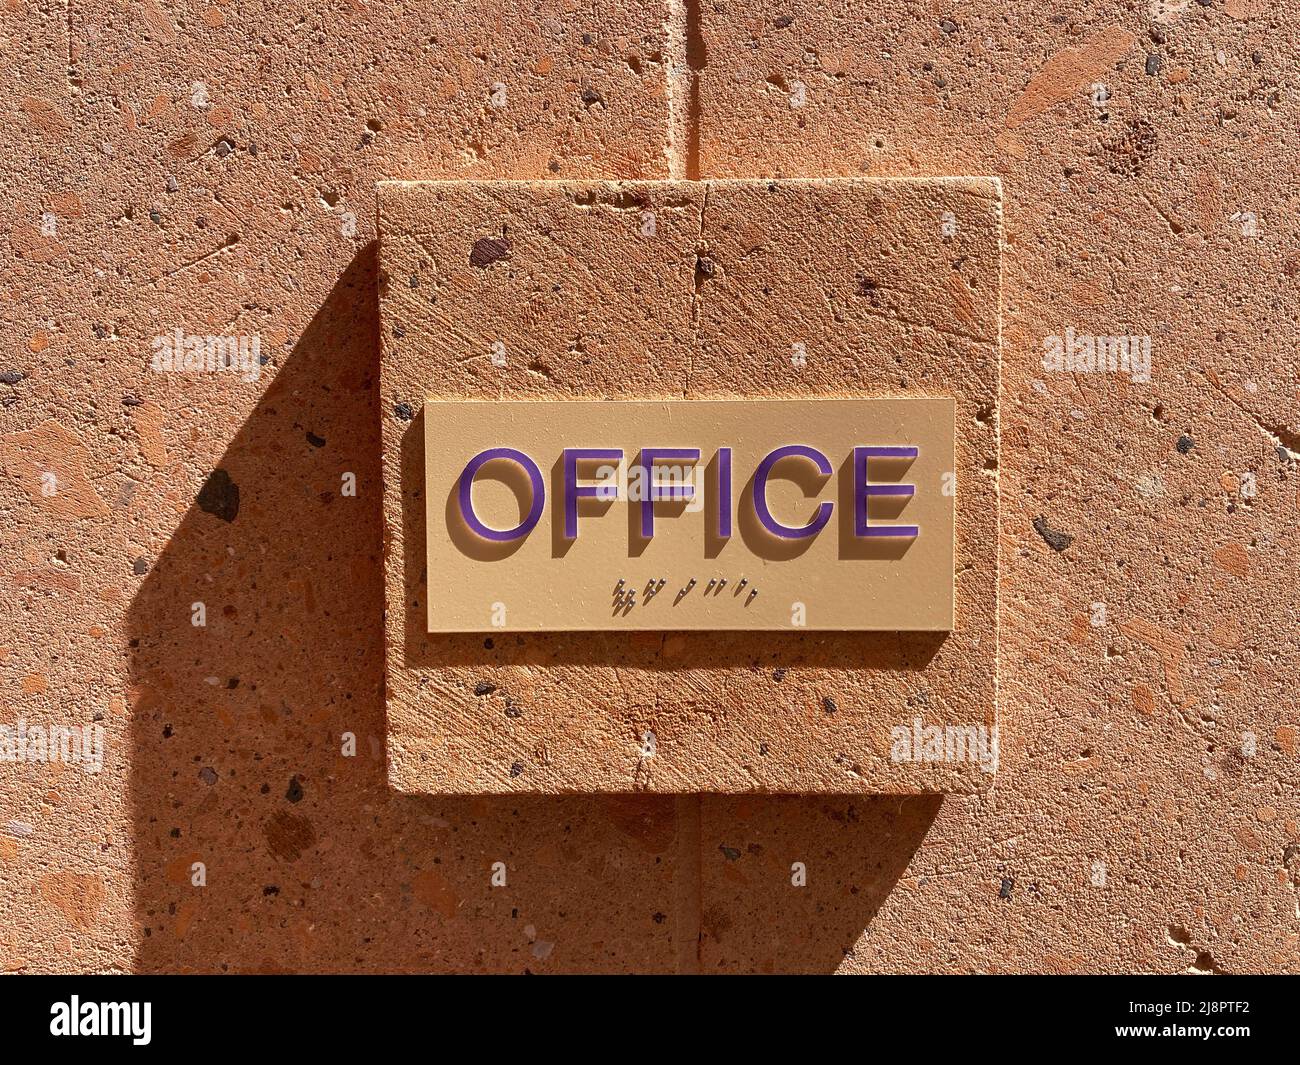 Office sign with tactile text. Stock Photo